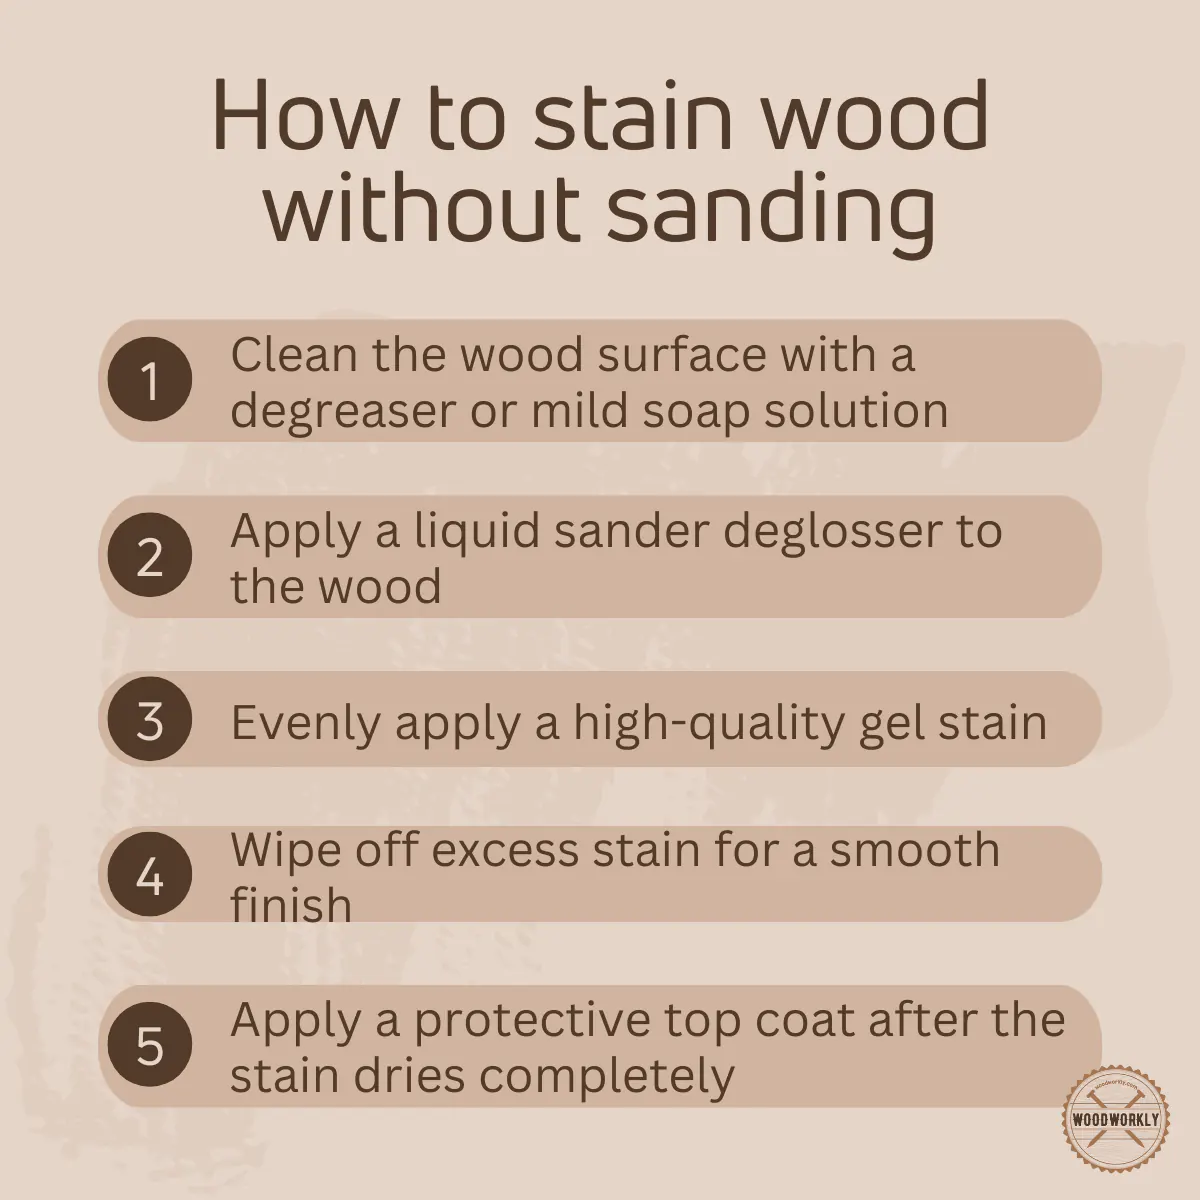 How to stain wood without sanding